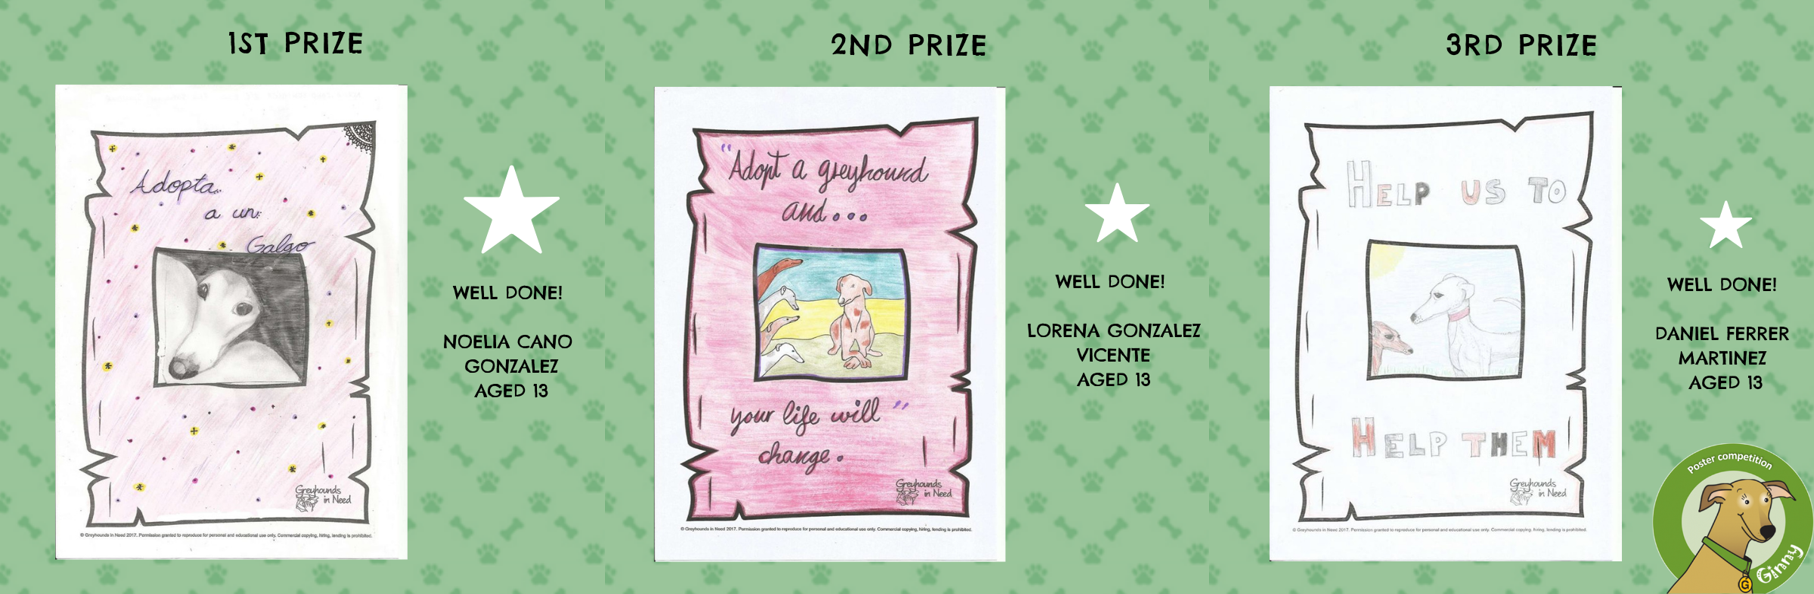 Galgo poster competition winners